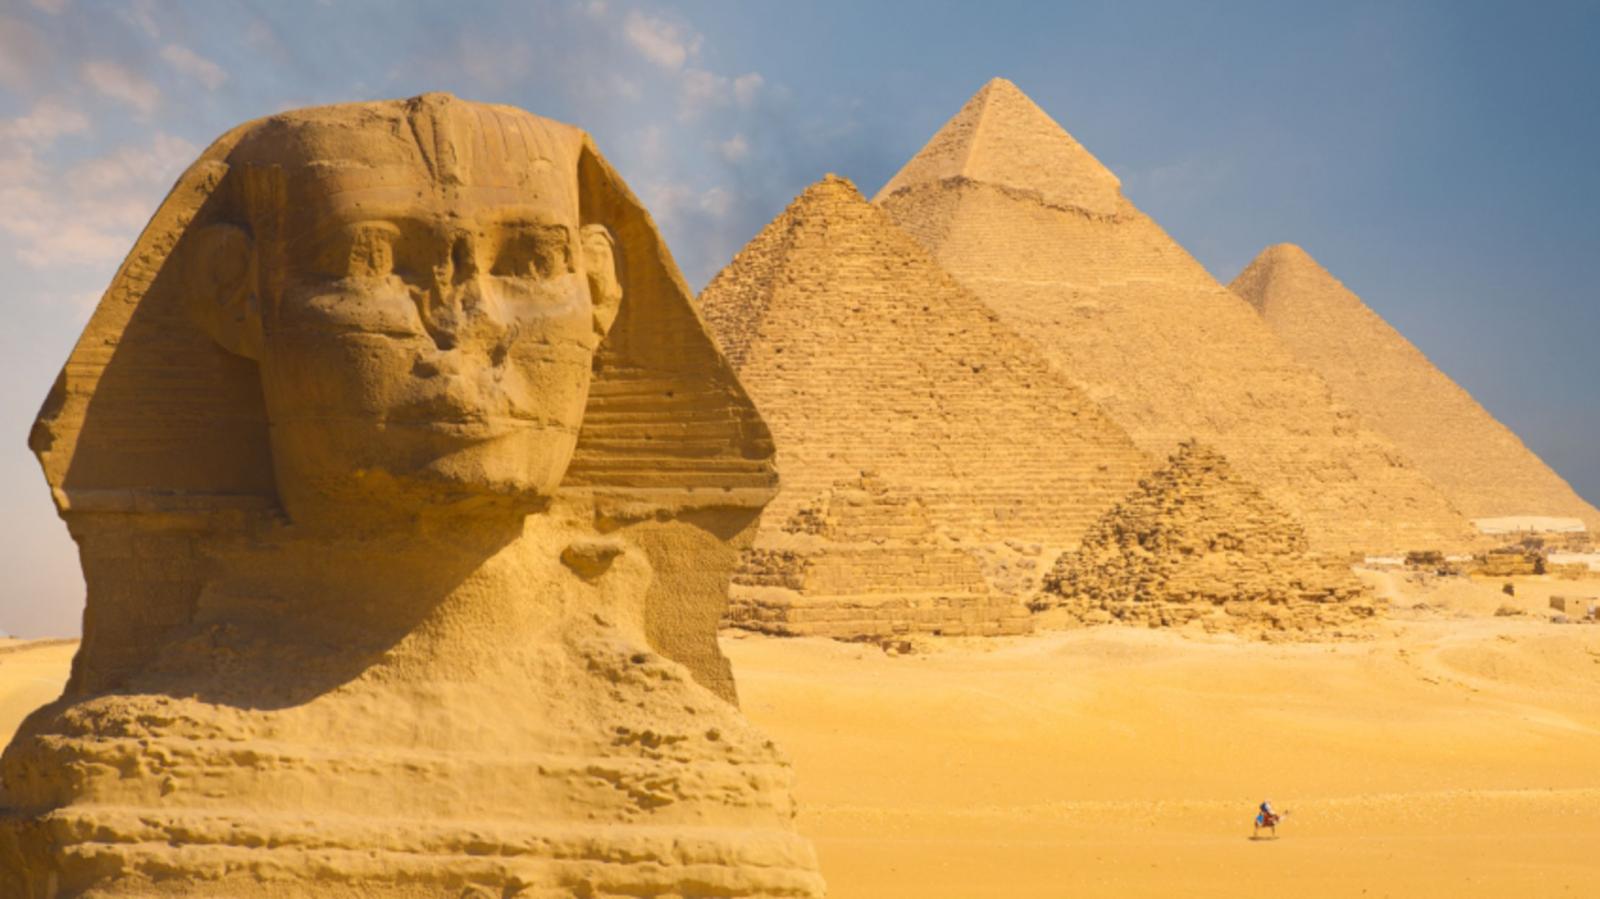 If You Get Over 80% On This 🛕 Ancient Monuments Quiz, You Know a Lot Great Sphinx